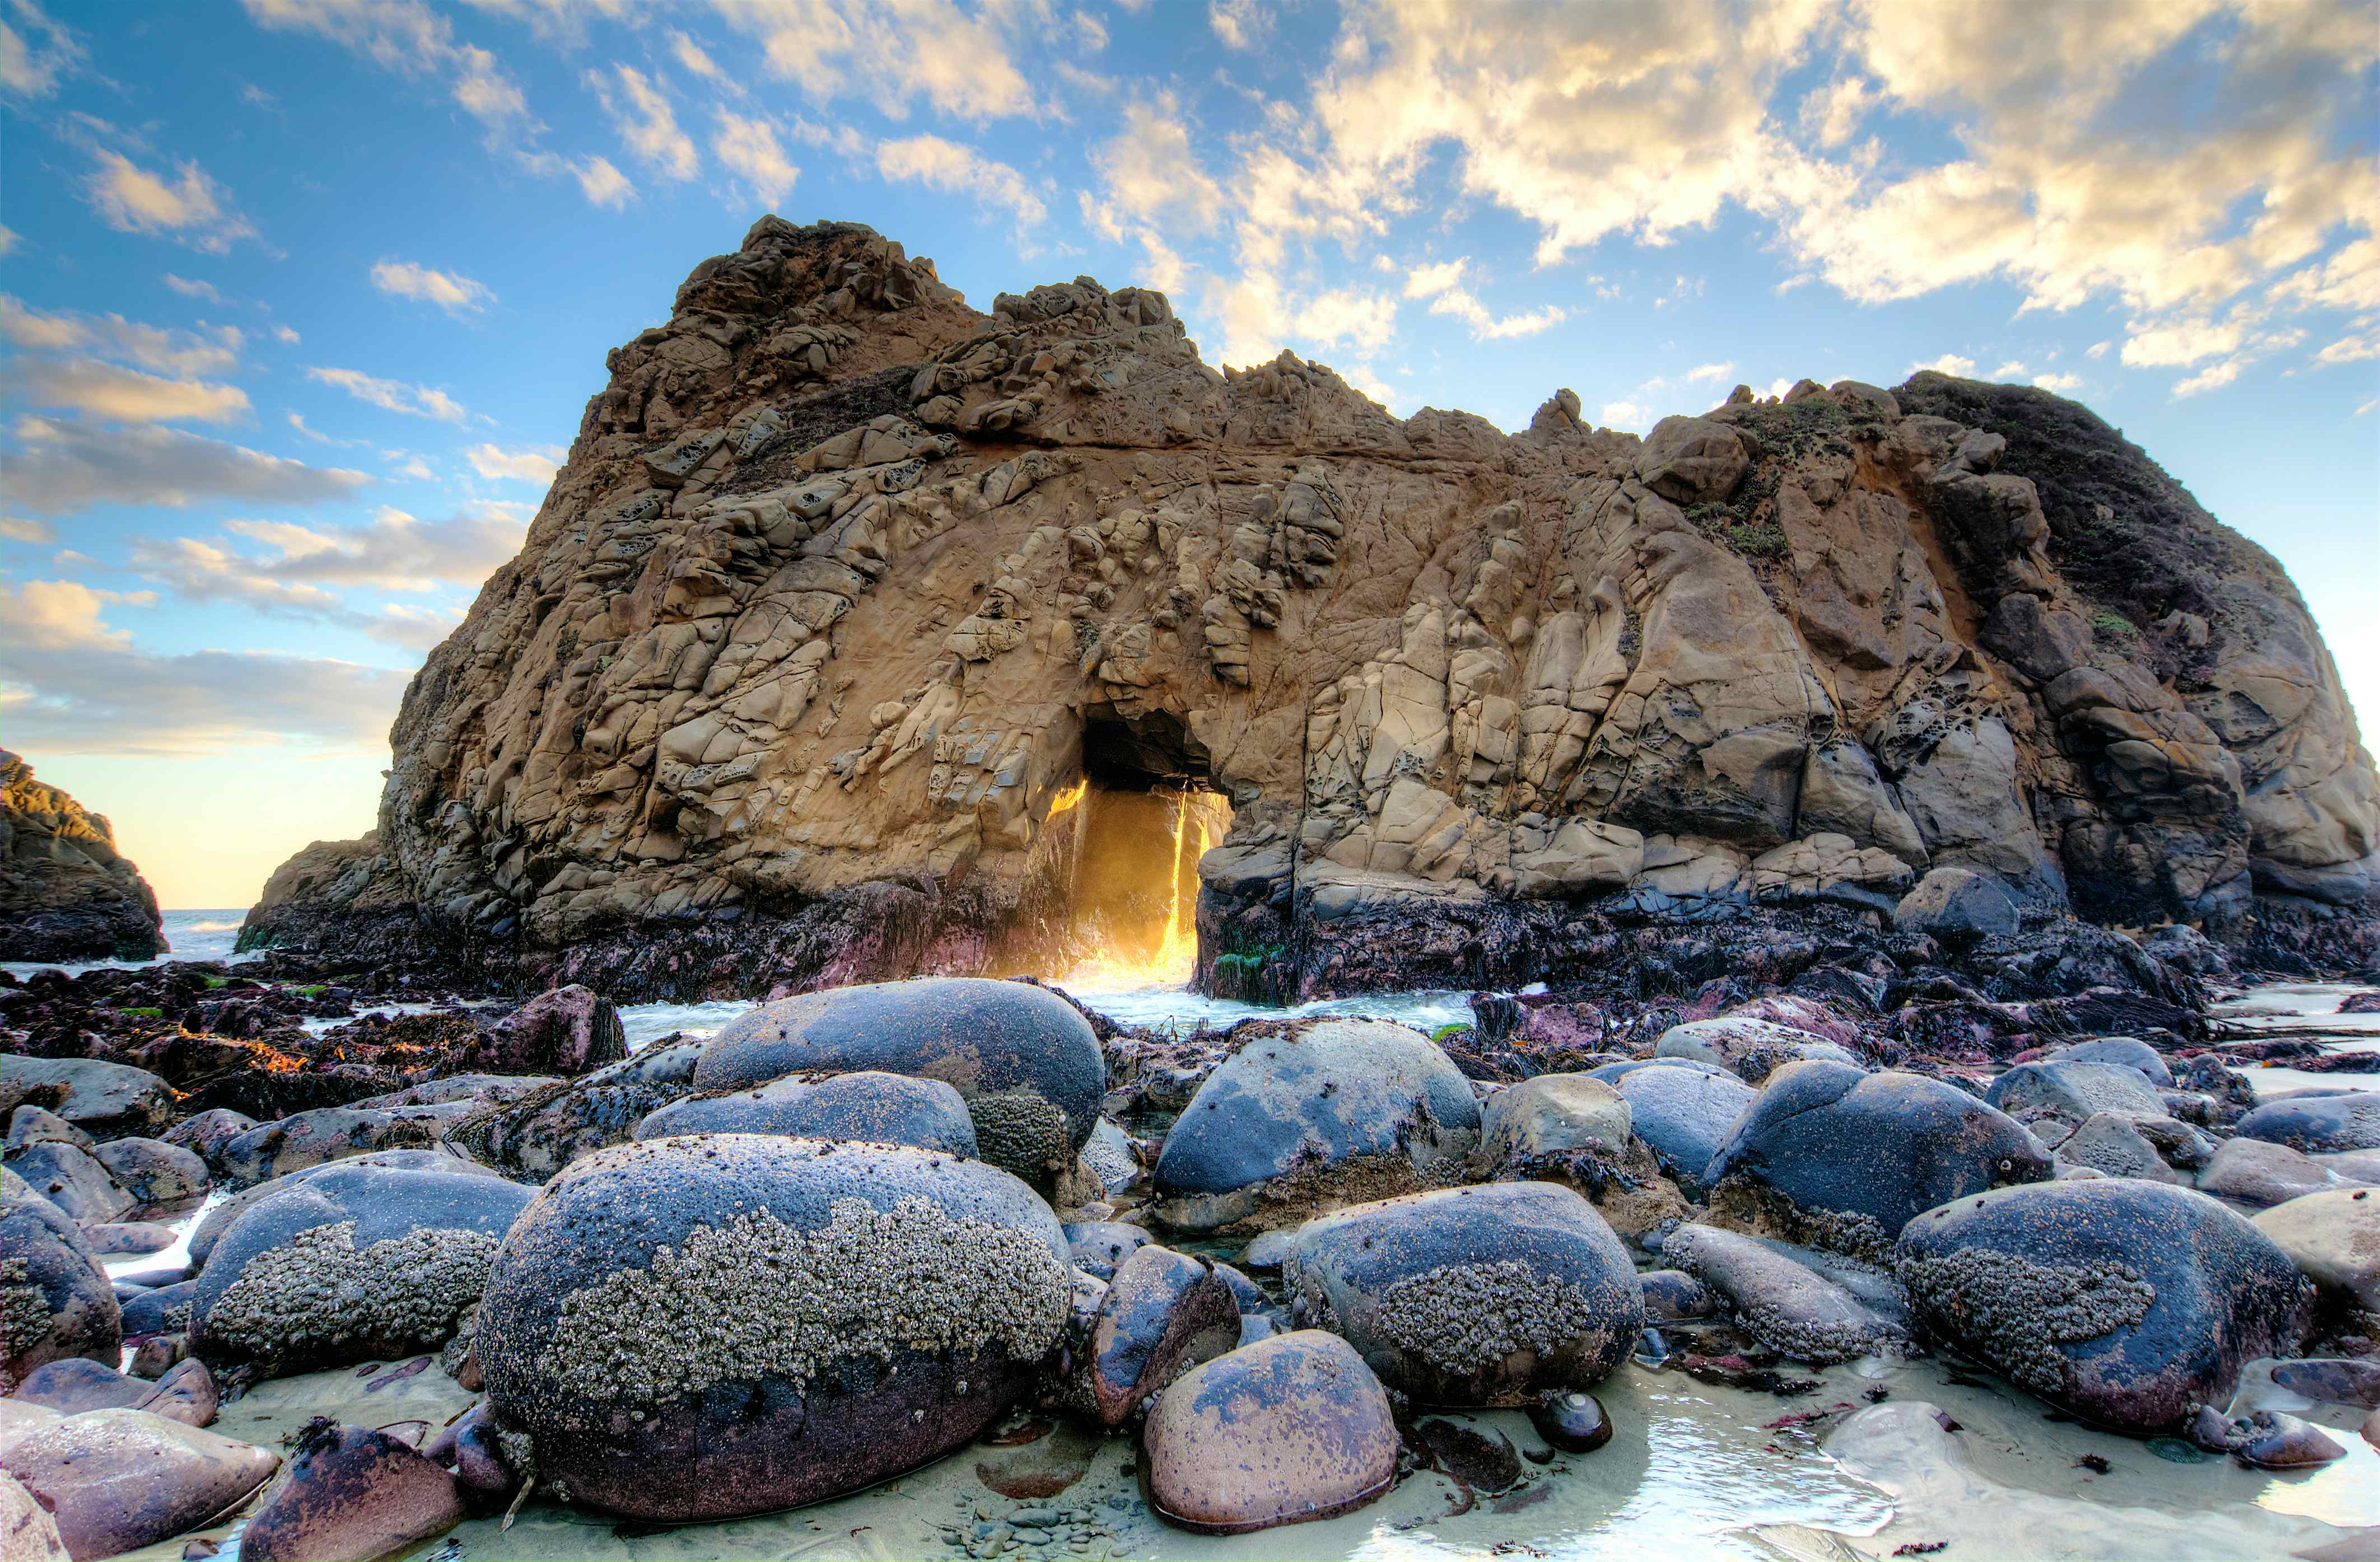 California's 10 best beaches - Lonely Planet